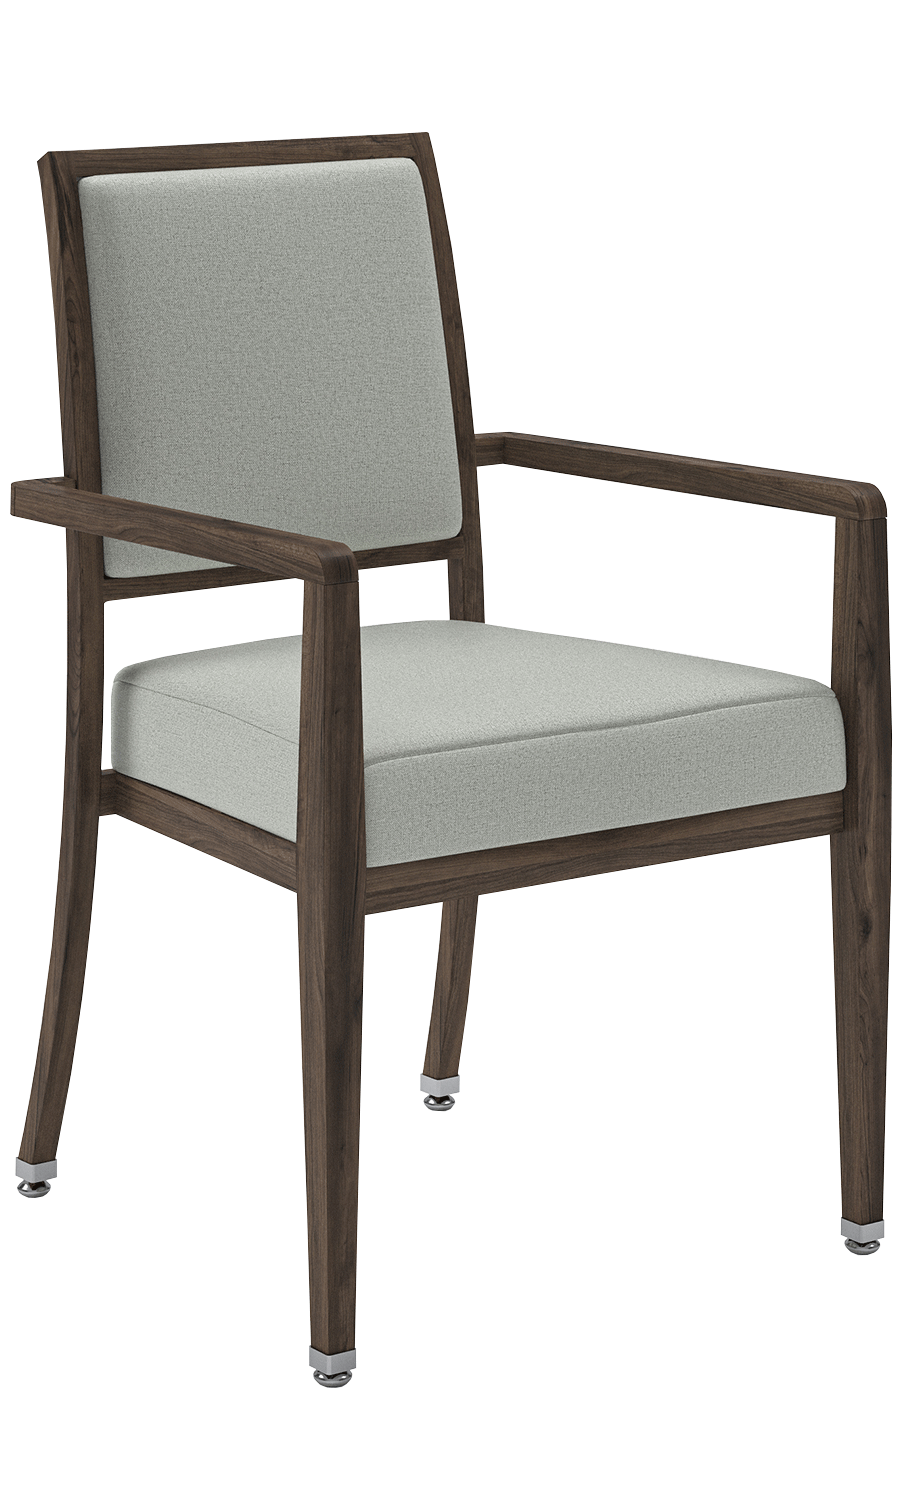 9209-1 Tufgrain Stacking Arm Chair 